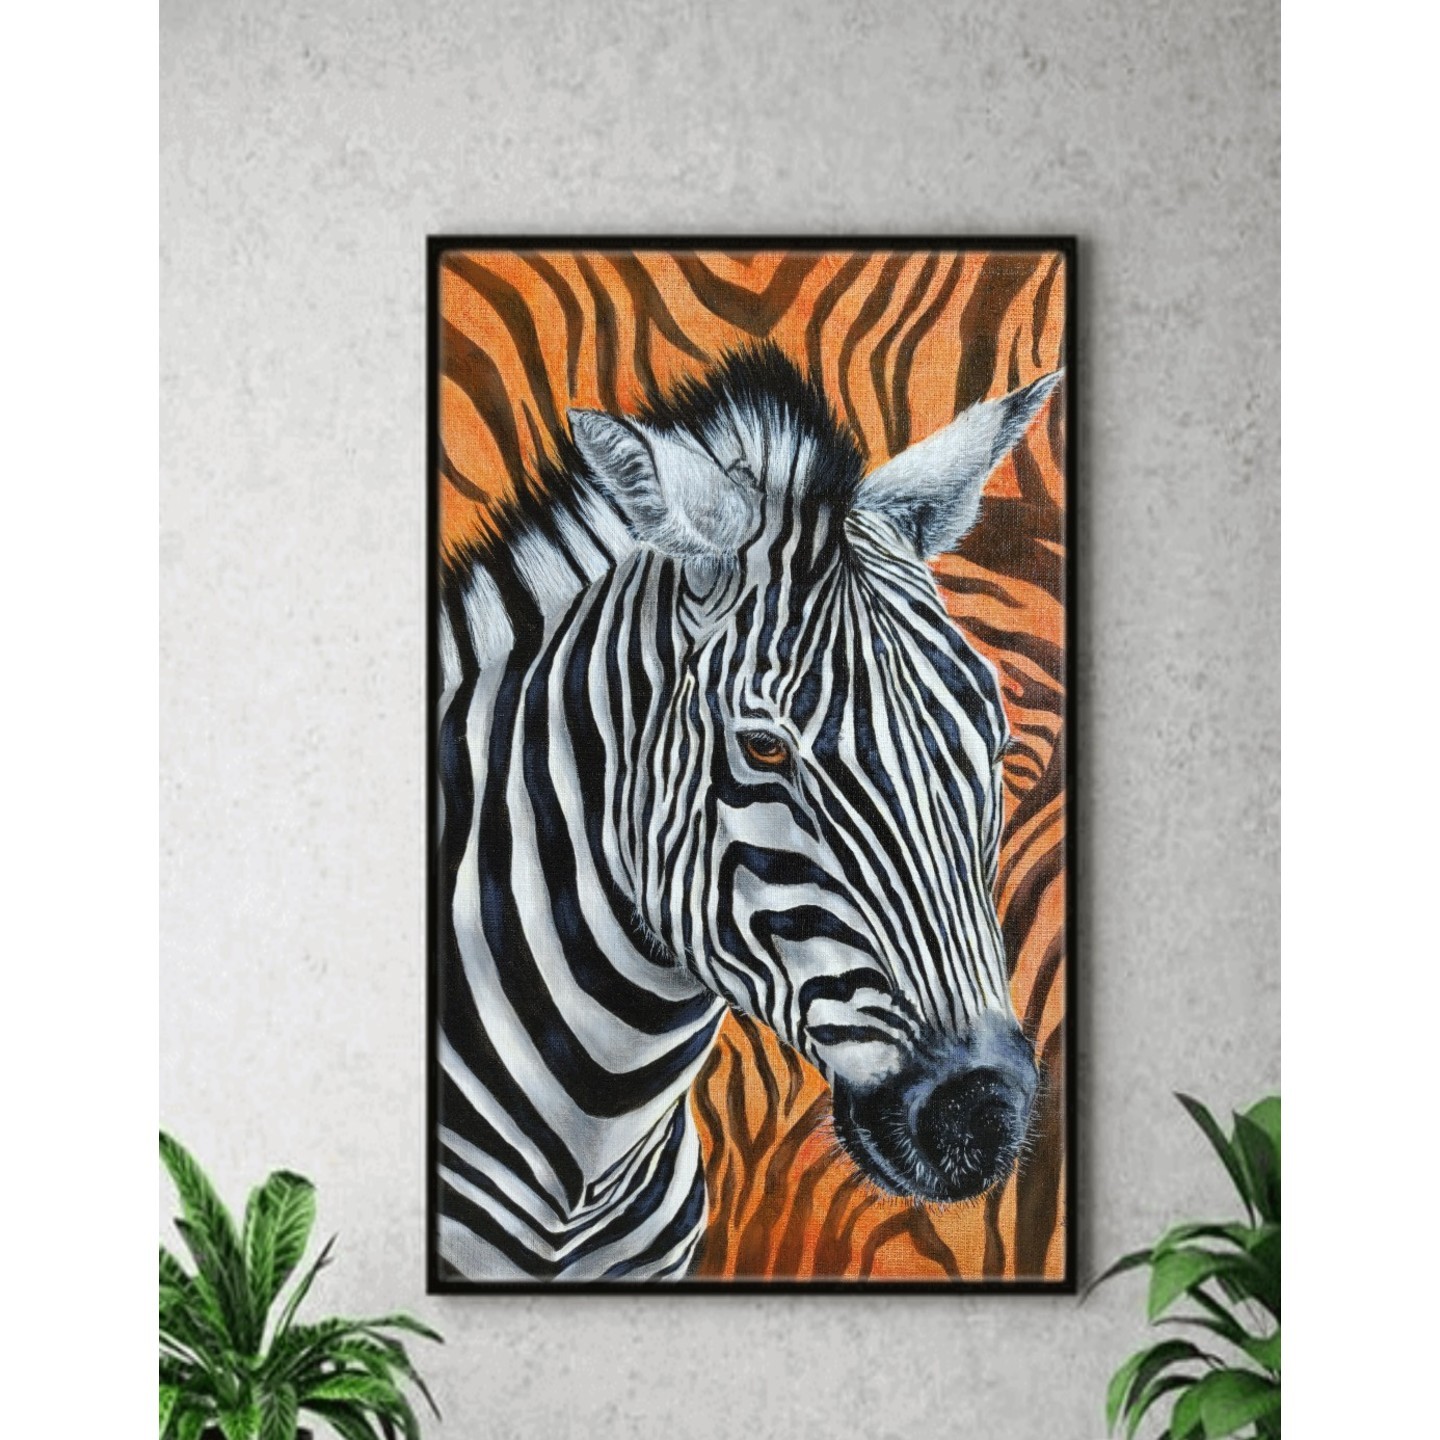 Zebra in a herd acrylic paintingon canvas for wildlife lovers